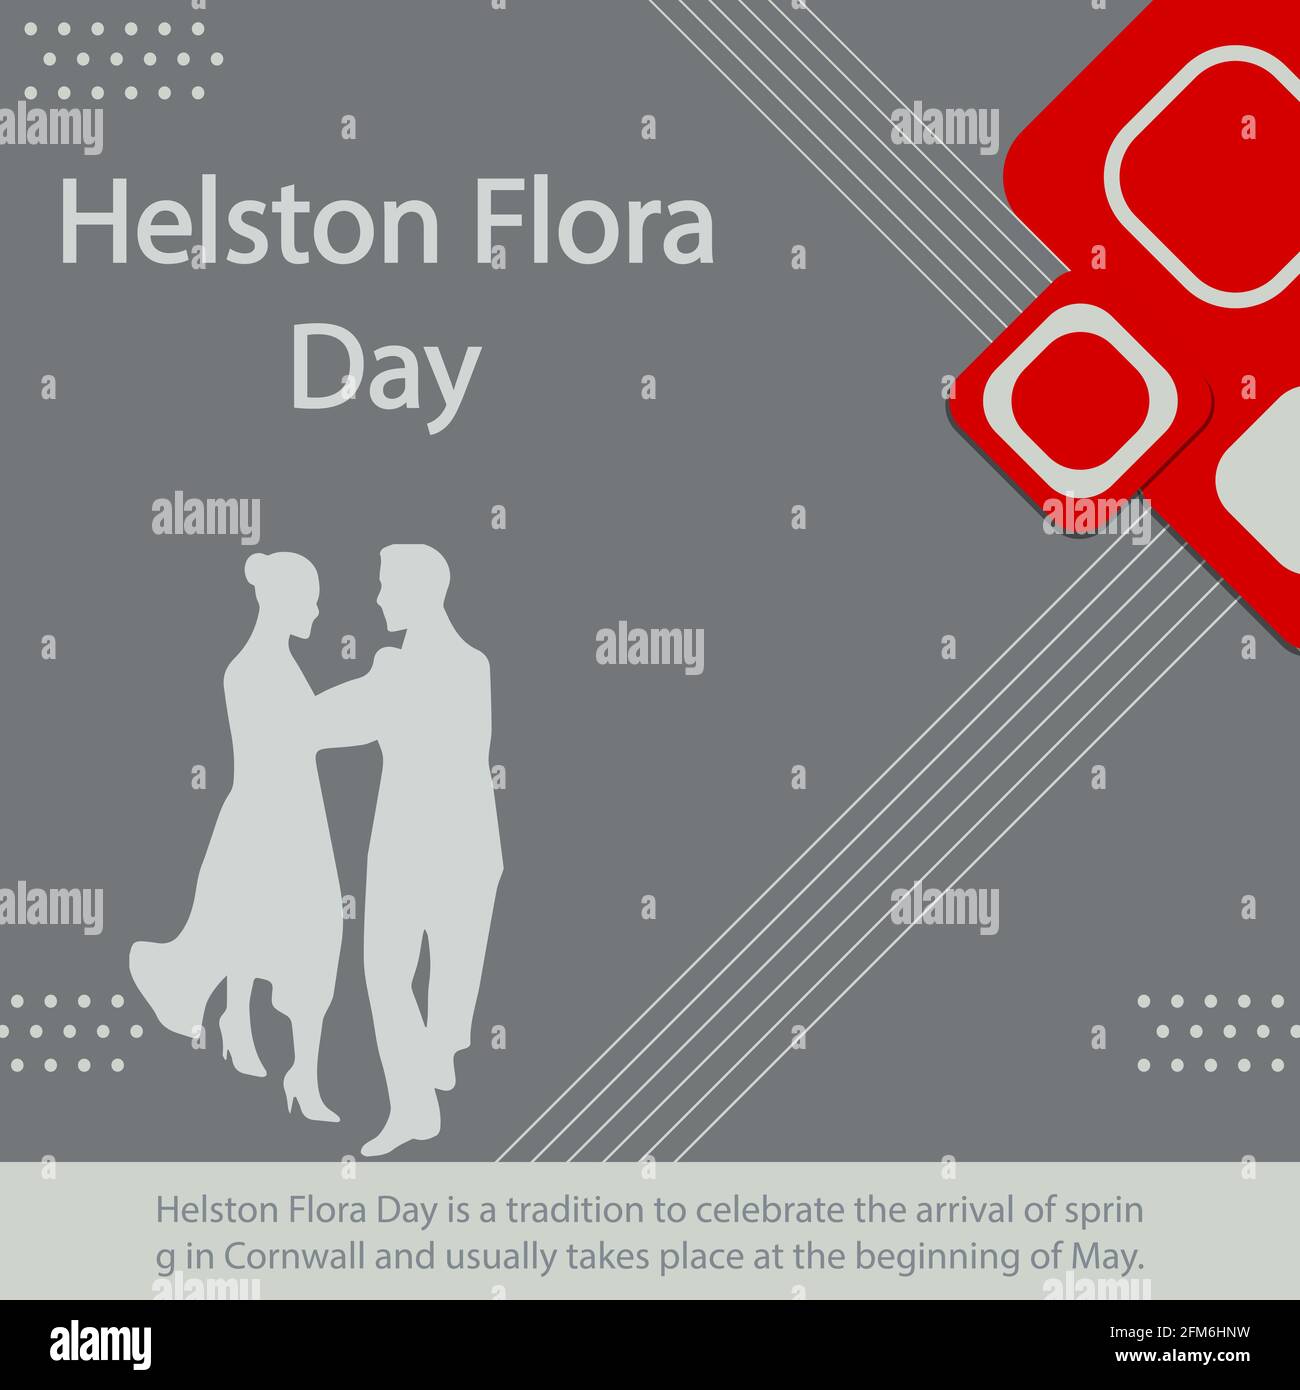 Helston Flora Day is a tradition to celebrate the arrival of spring in Cornwall and usually takes place at the beginning of May. Stock Vector